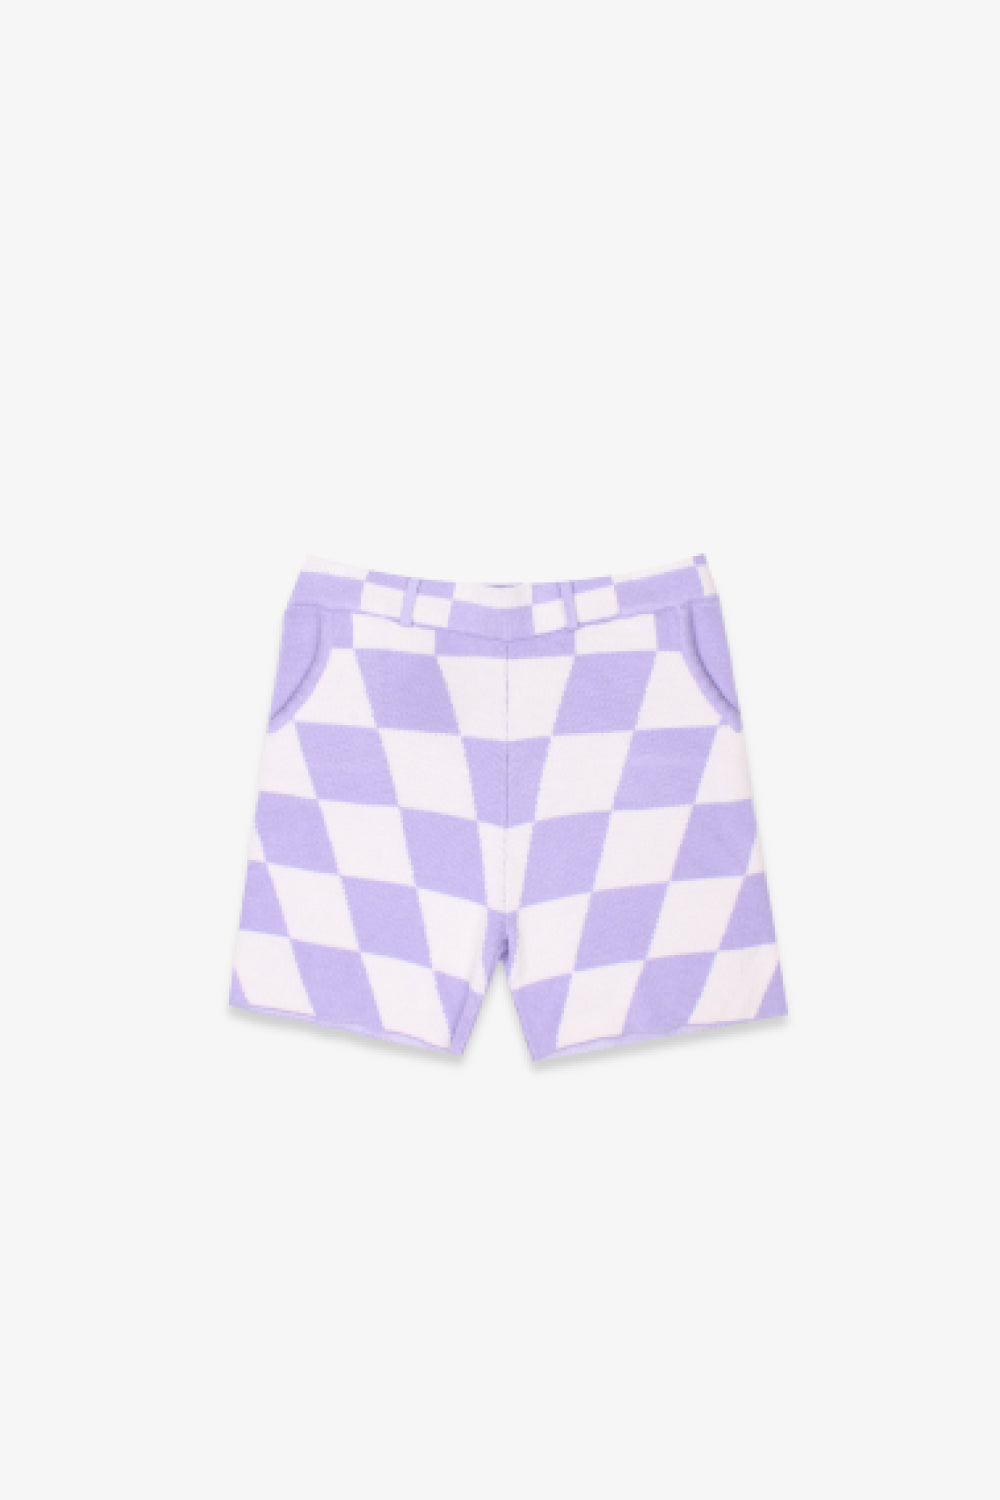 Lavender Distorted Checkered Shorts